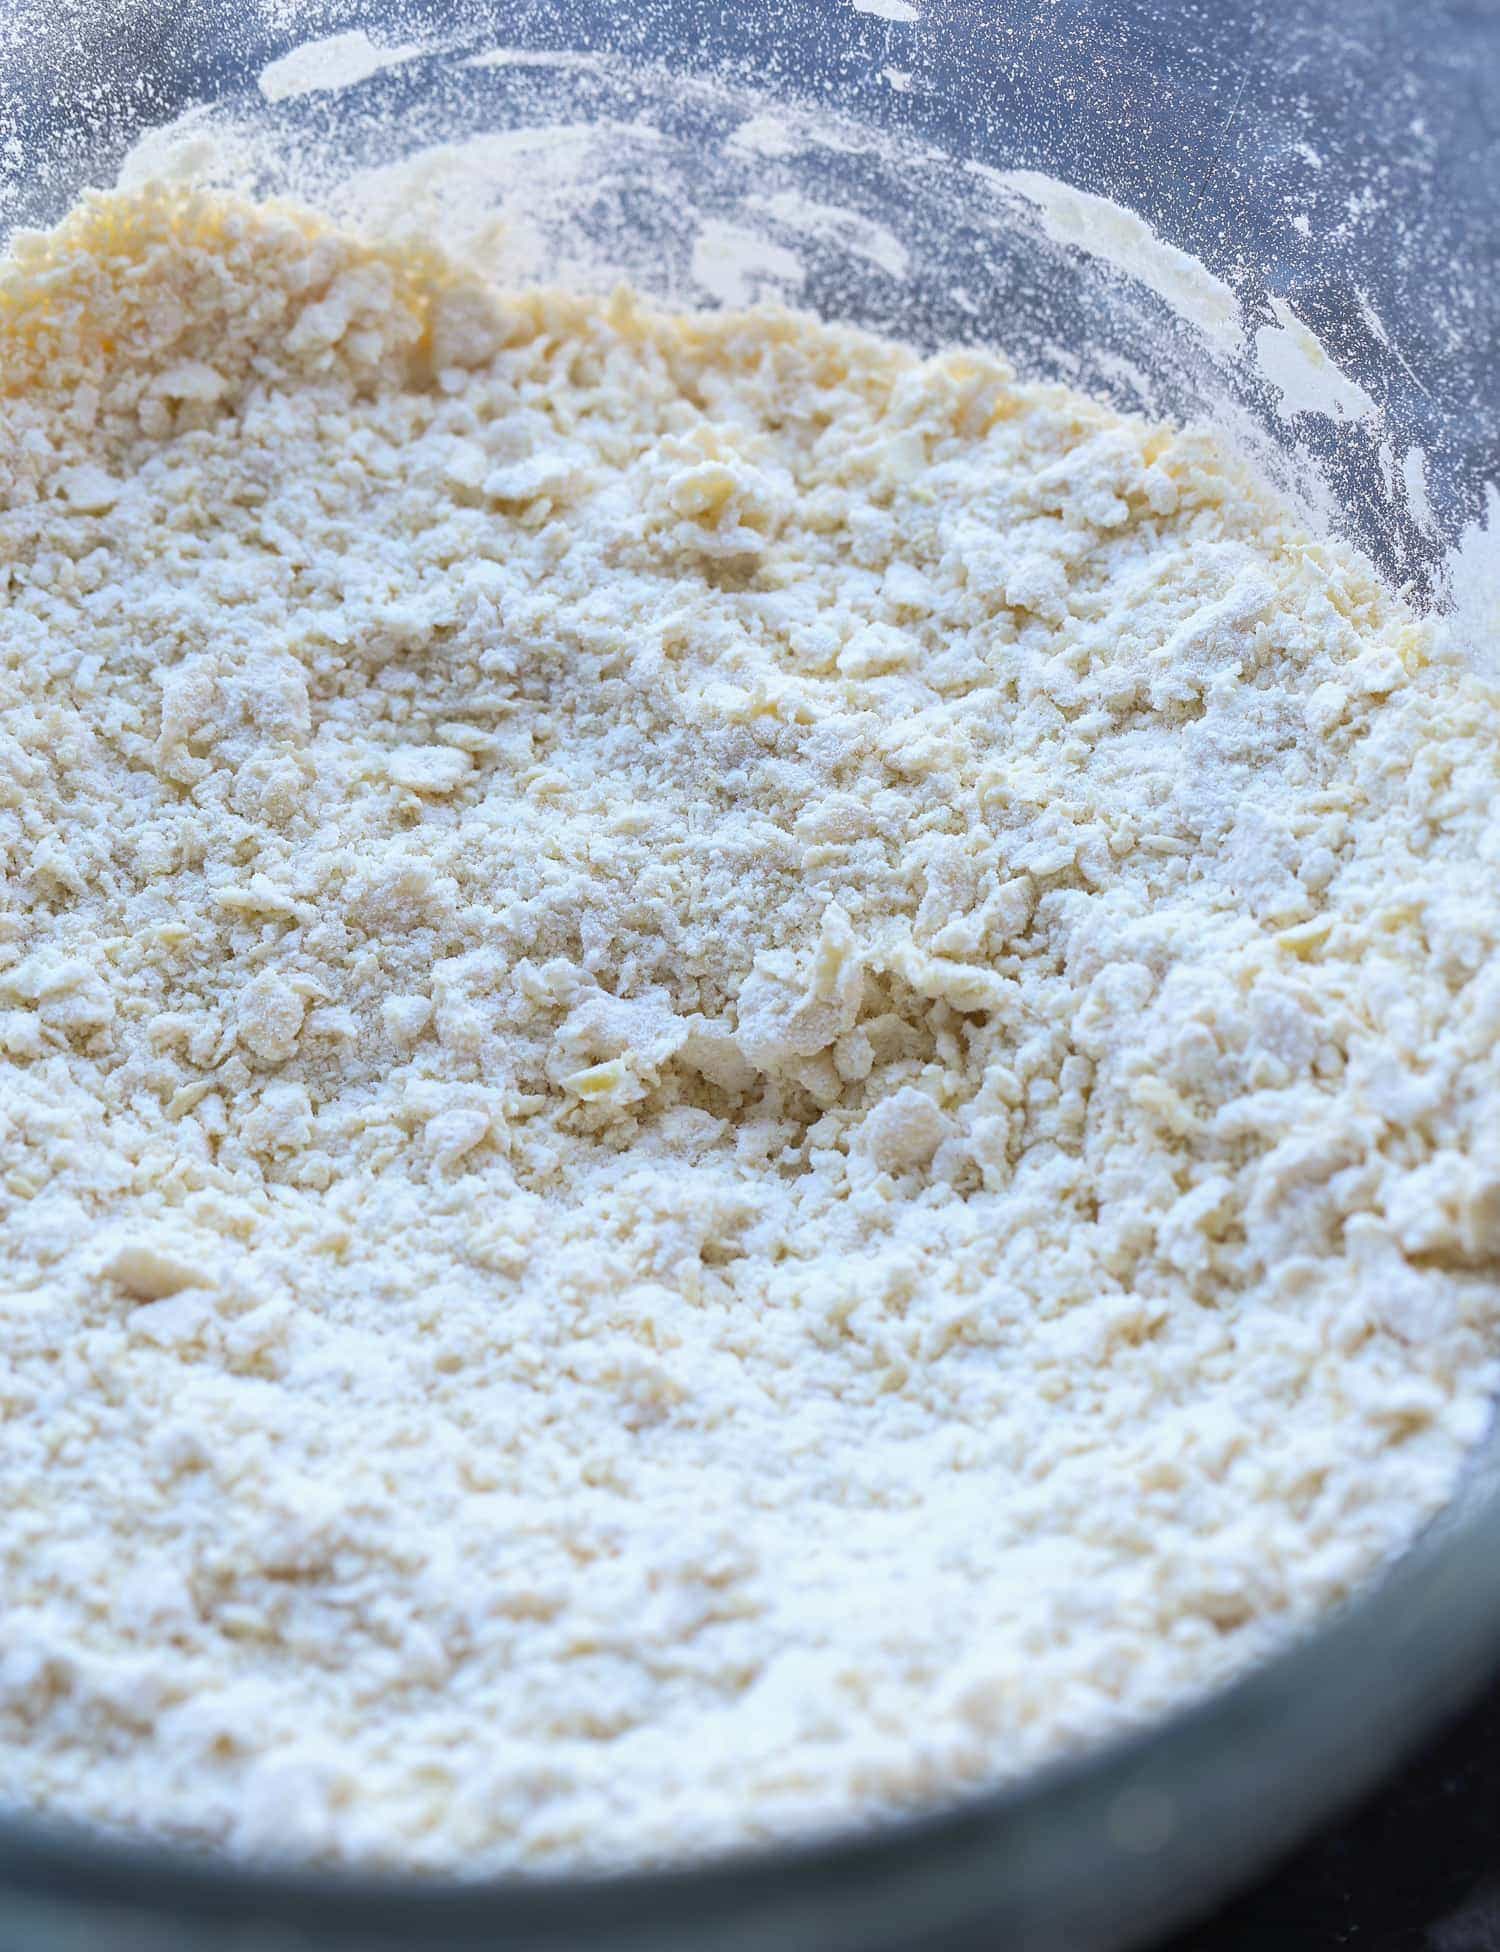 Eggs and flour in a mixing bowl forming small clumps